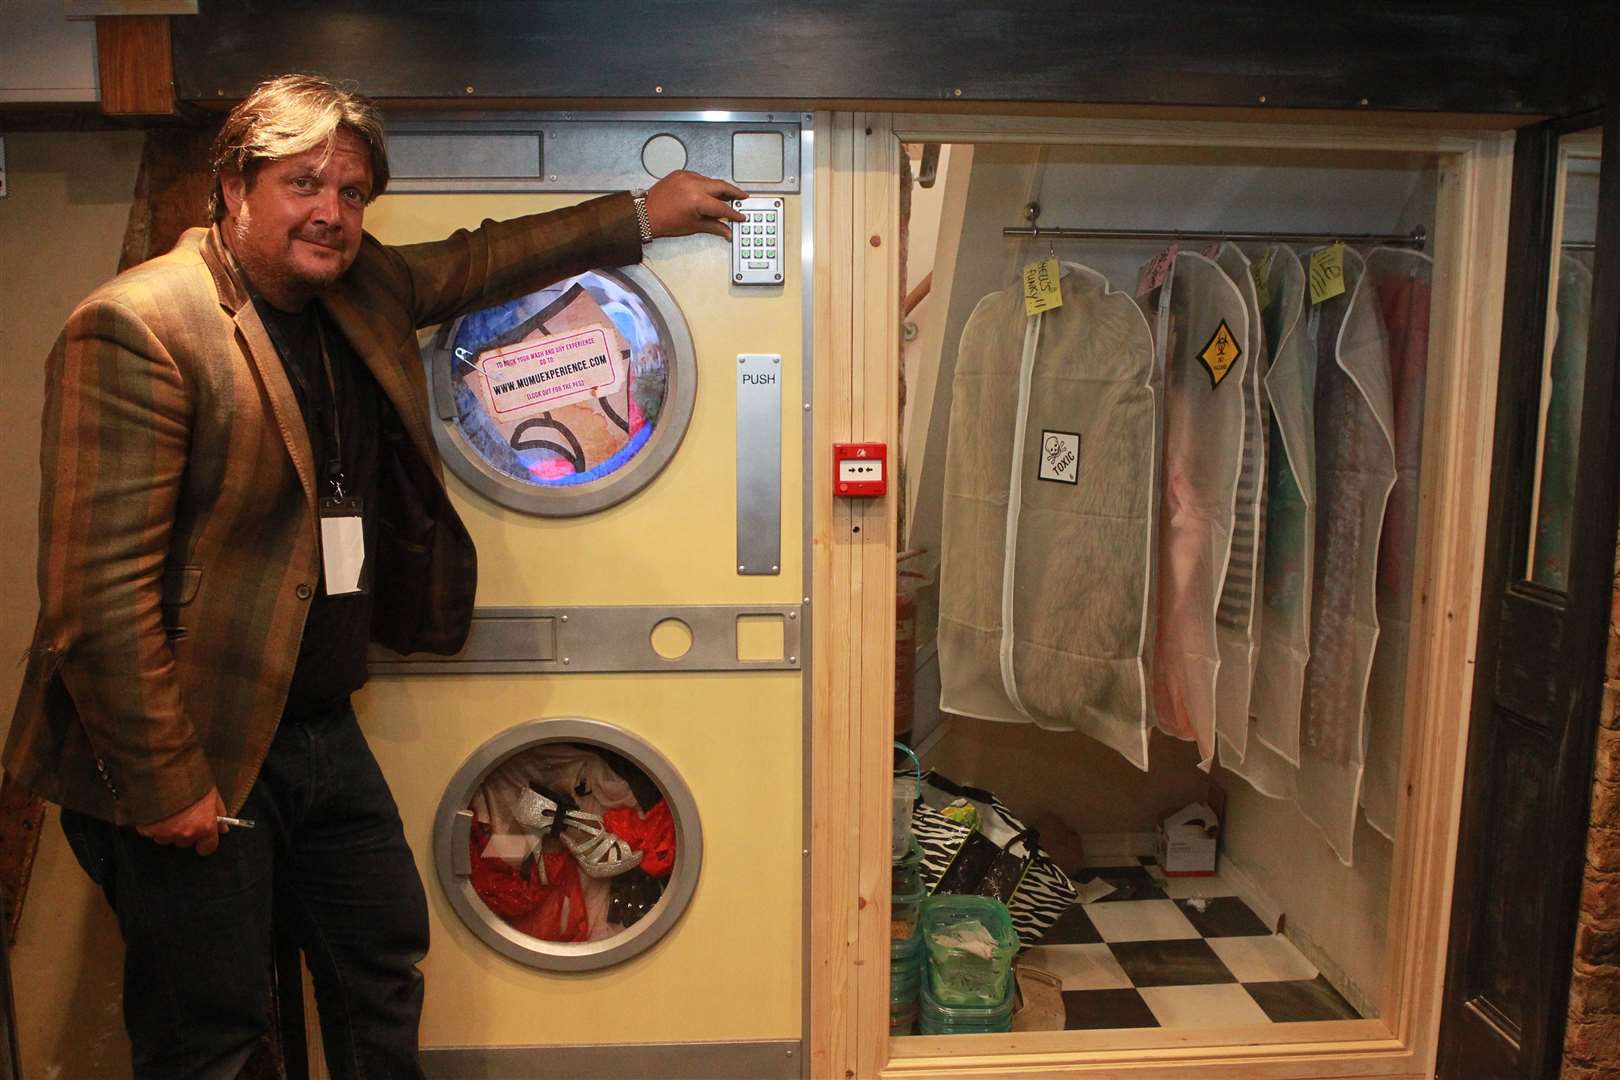 Ciaran O' Quigley, Owner of Mu Mu teases us at the entrance of a new launderette